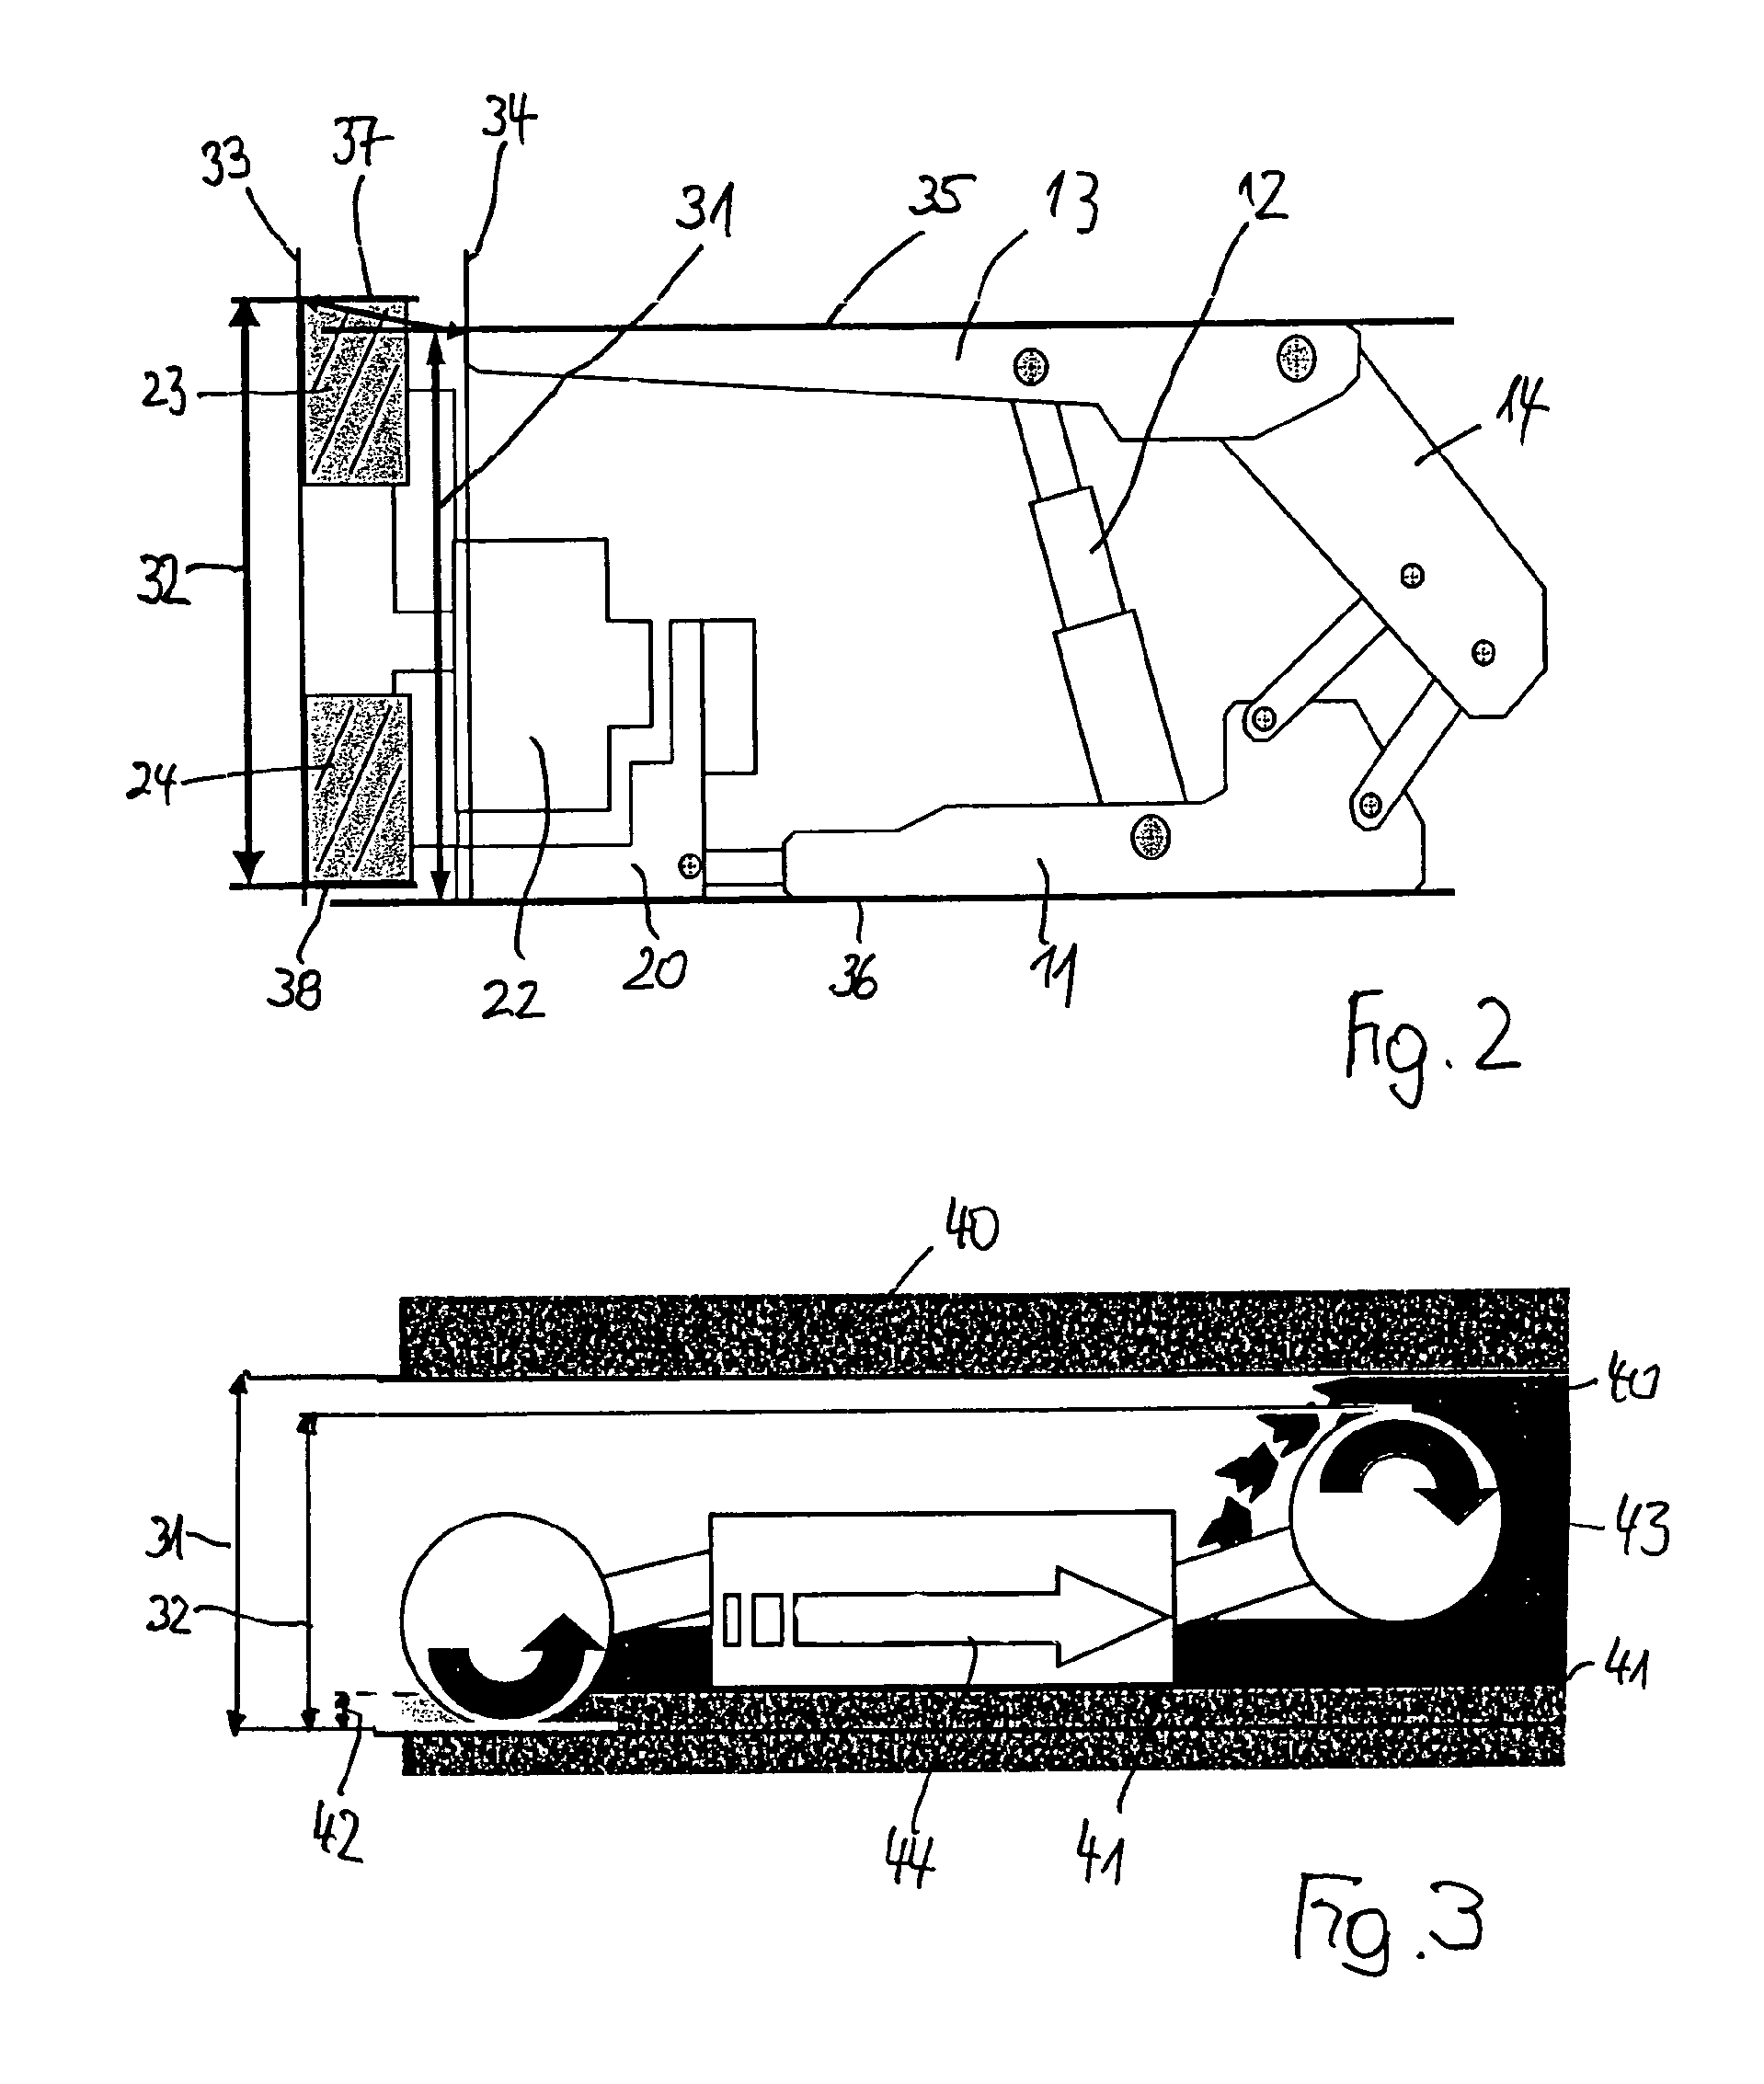 Method for automatically creating a defined face opening in longwall mining operations